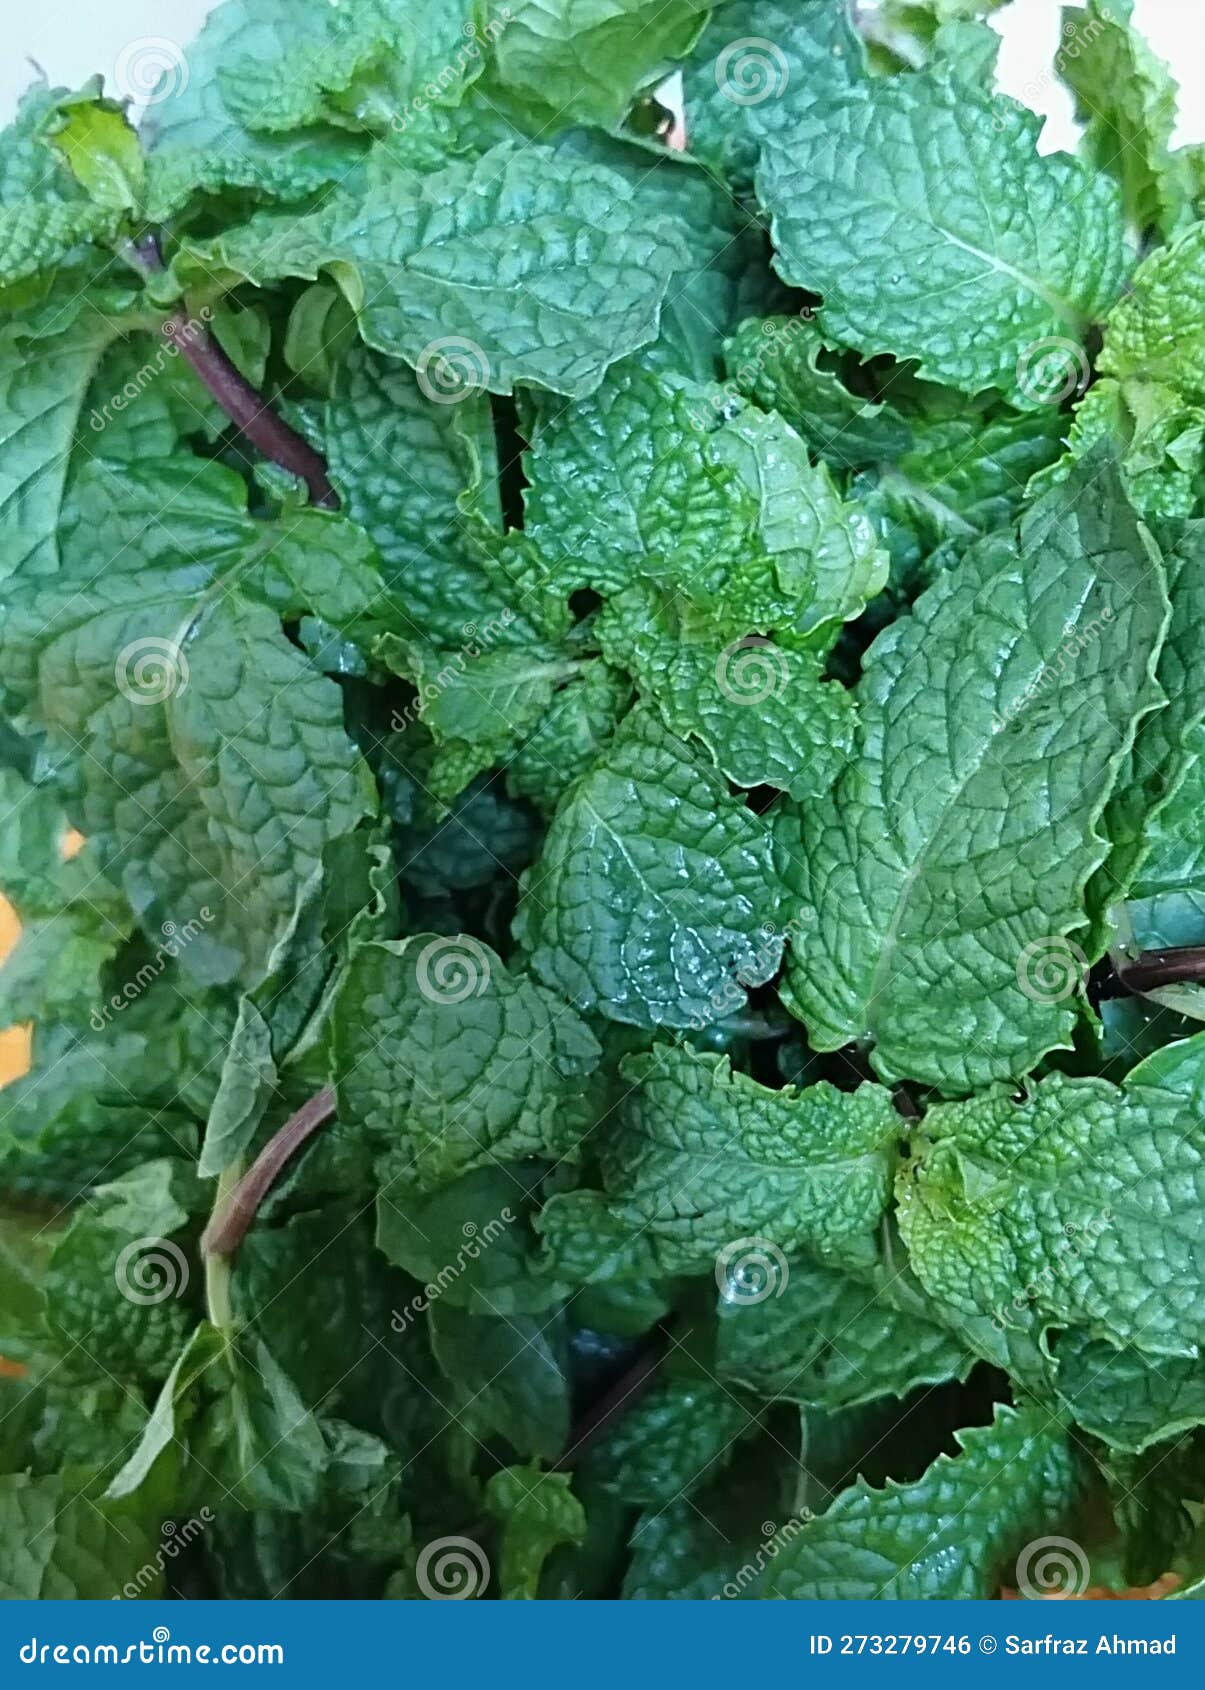 Texture of Mint Leaves stock photo. Image of texture - 273279746